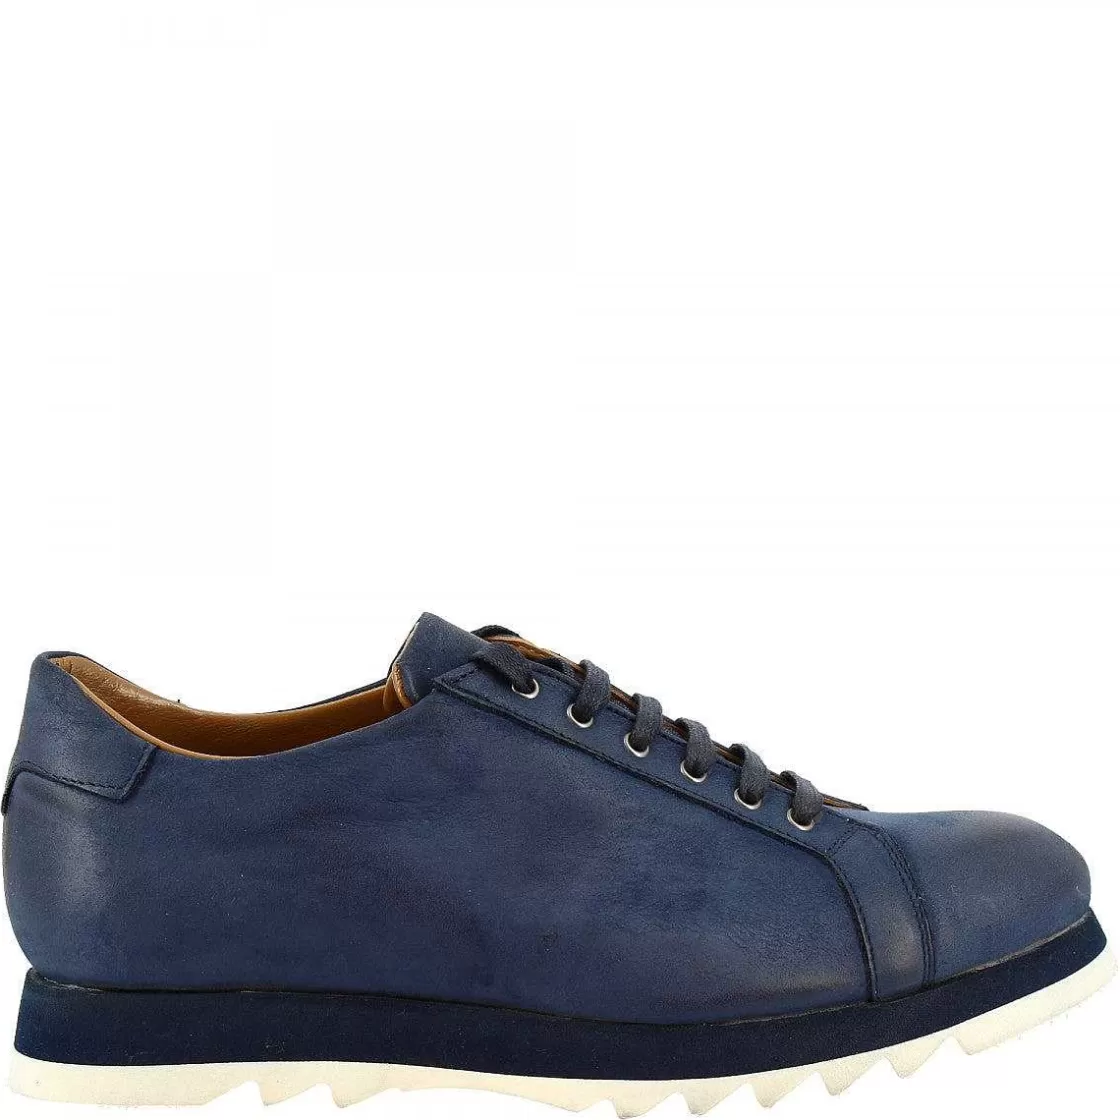 Leonardo Men'S Handmade Round Toe Casual Lace-Up Shoes In Blue Nappa Leather Outlet